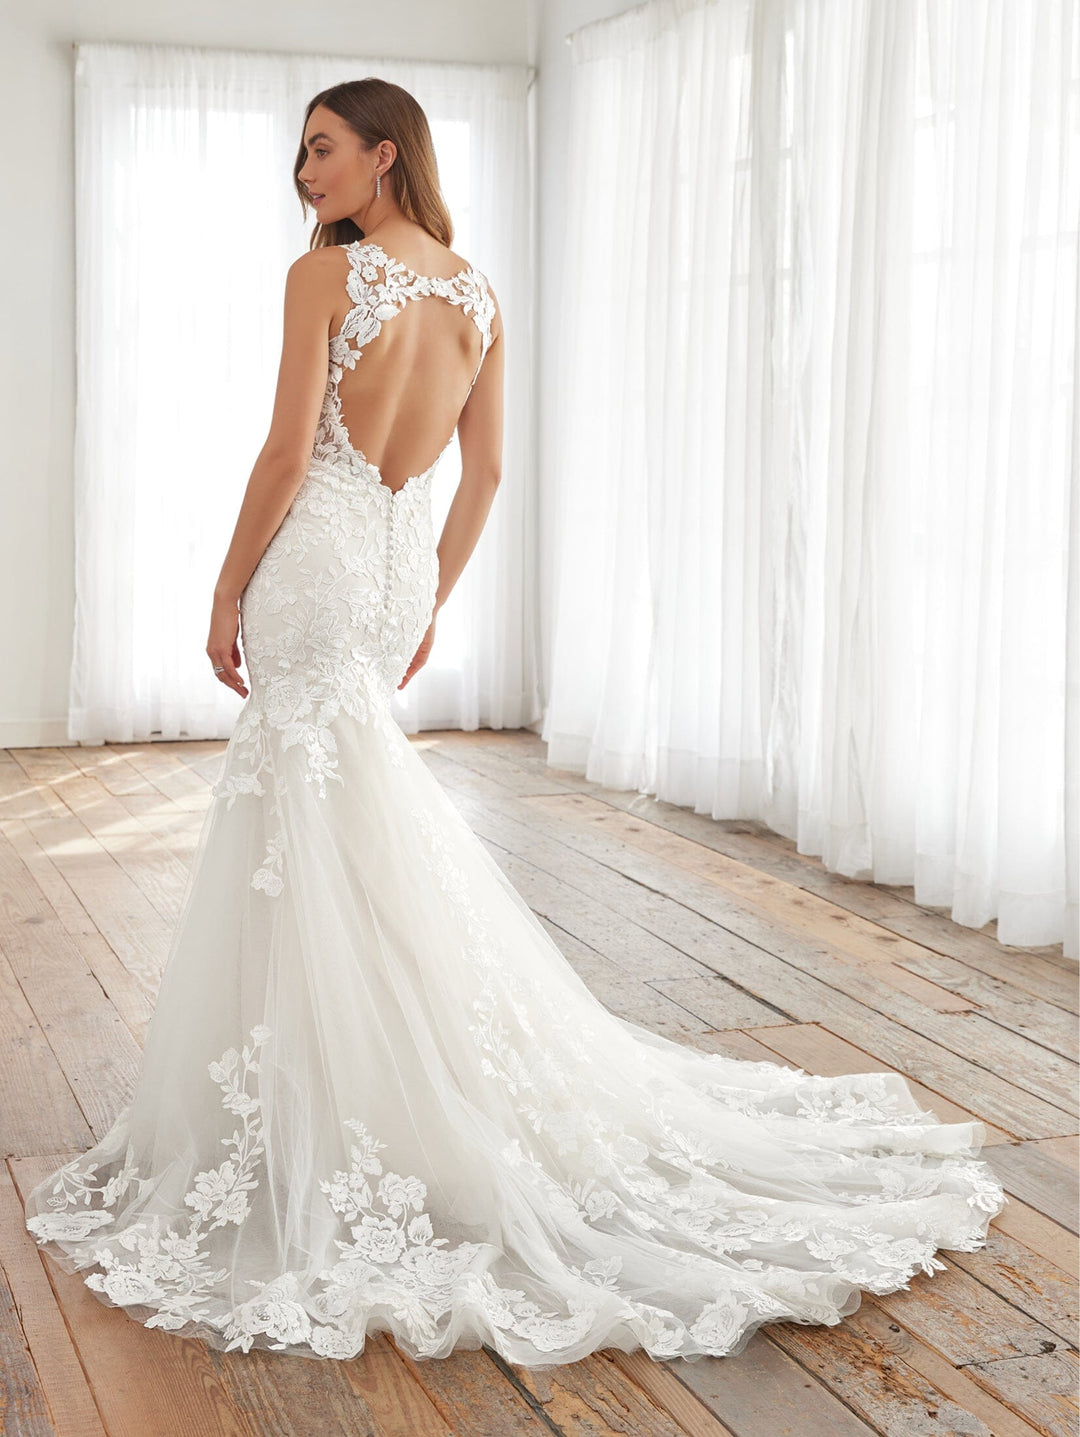 Applique Mermaid Bridal Gown by Adrianna Papell 31235